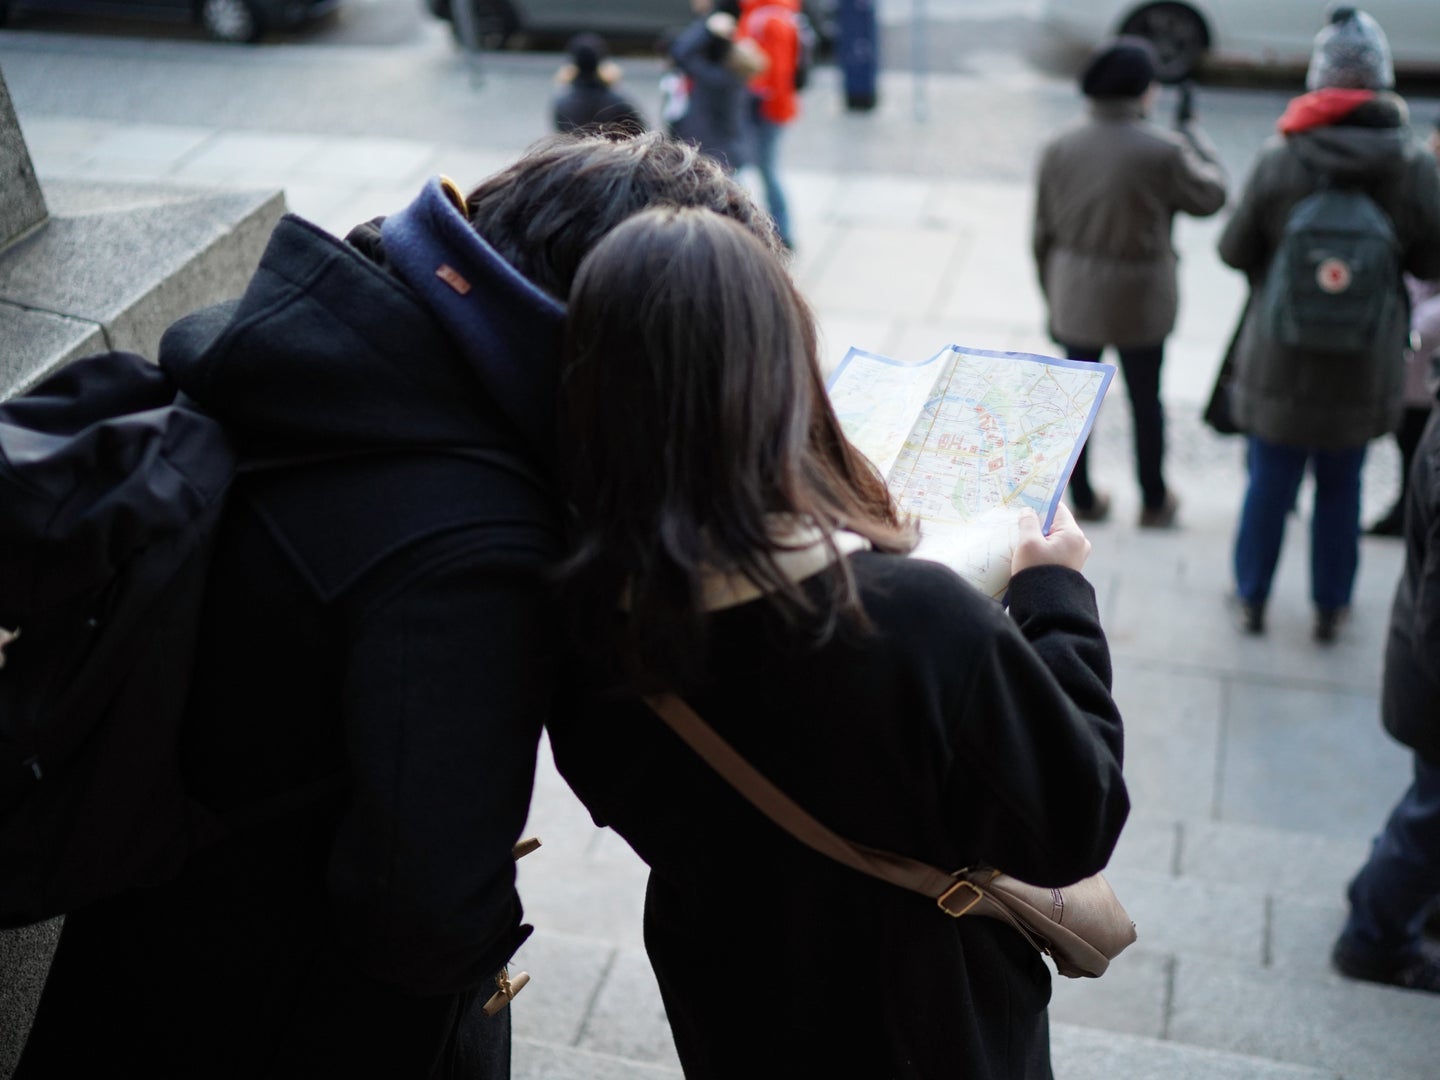 Two people in black jackets standing on a city street trying to figure out how to get from one place to another by using a map.